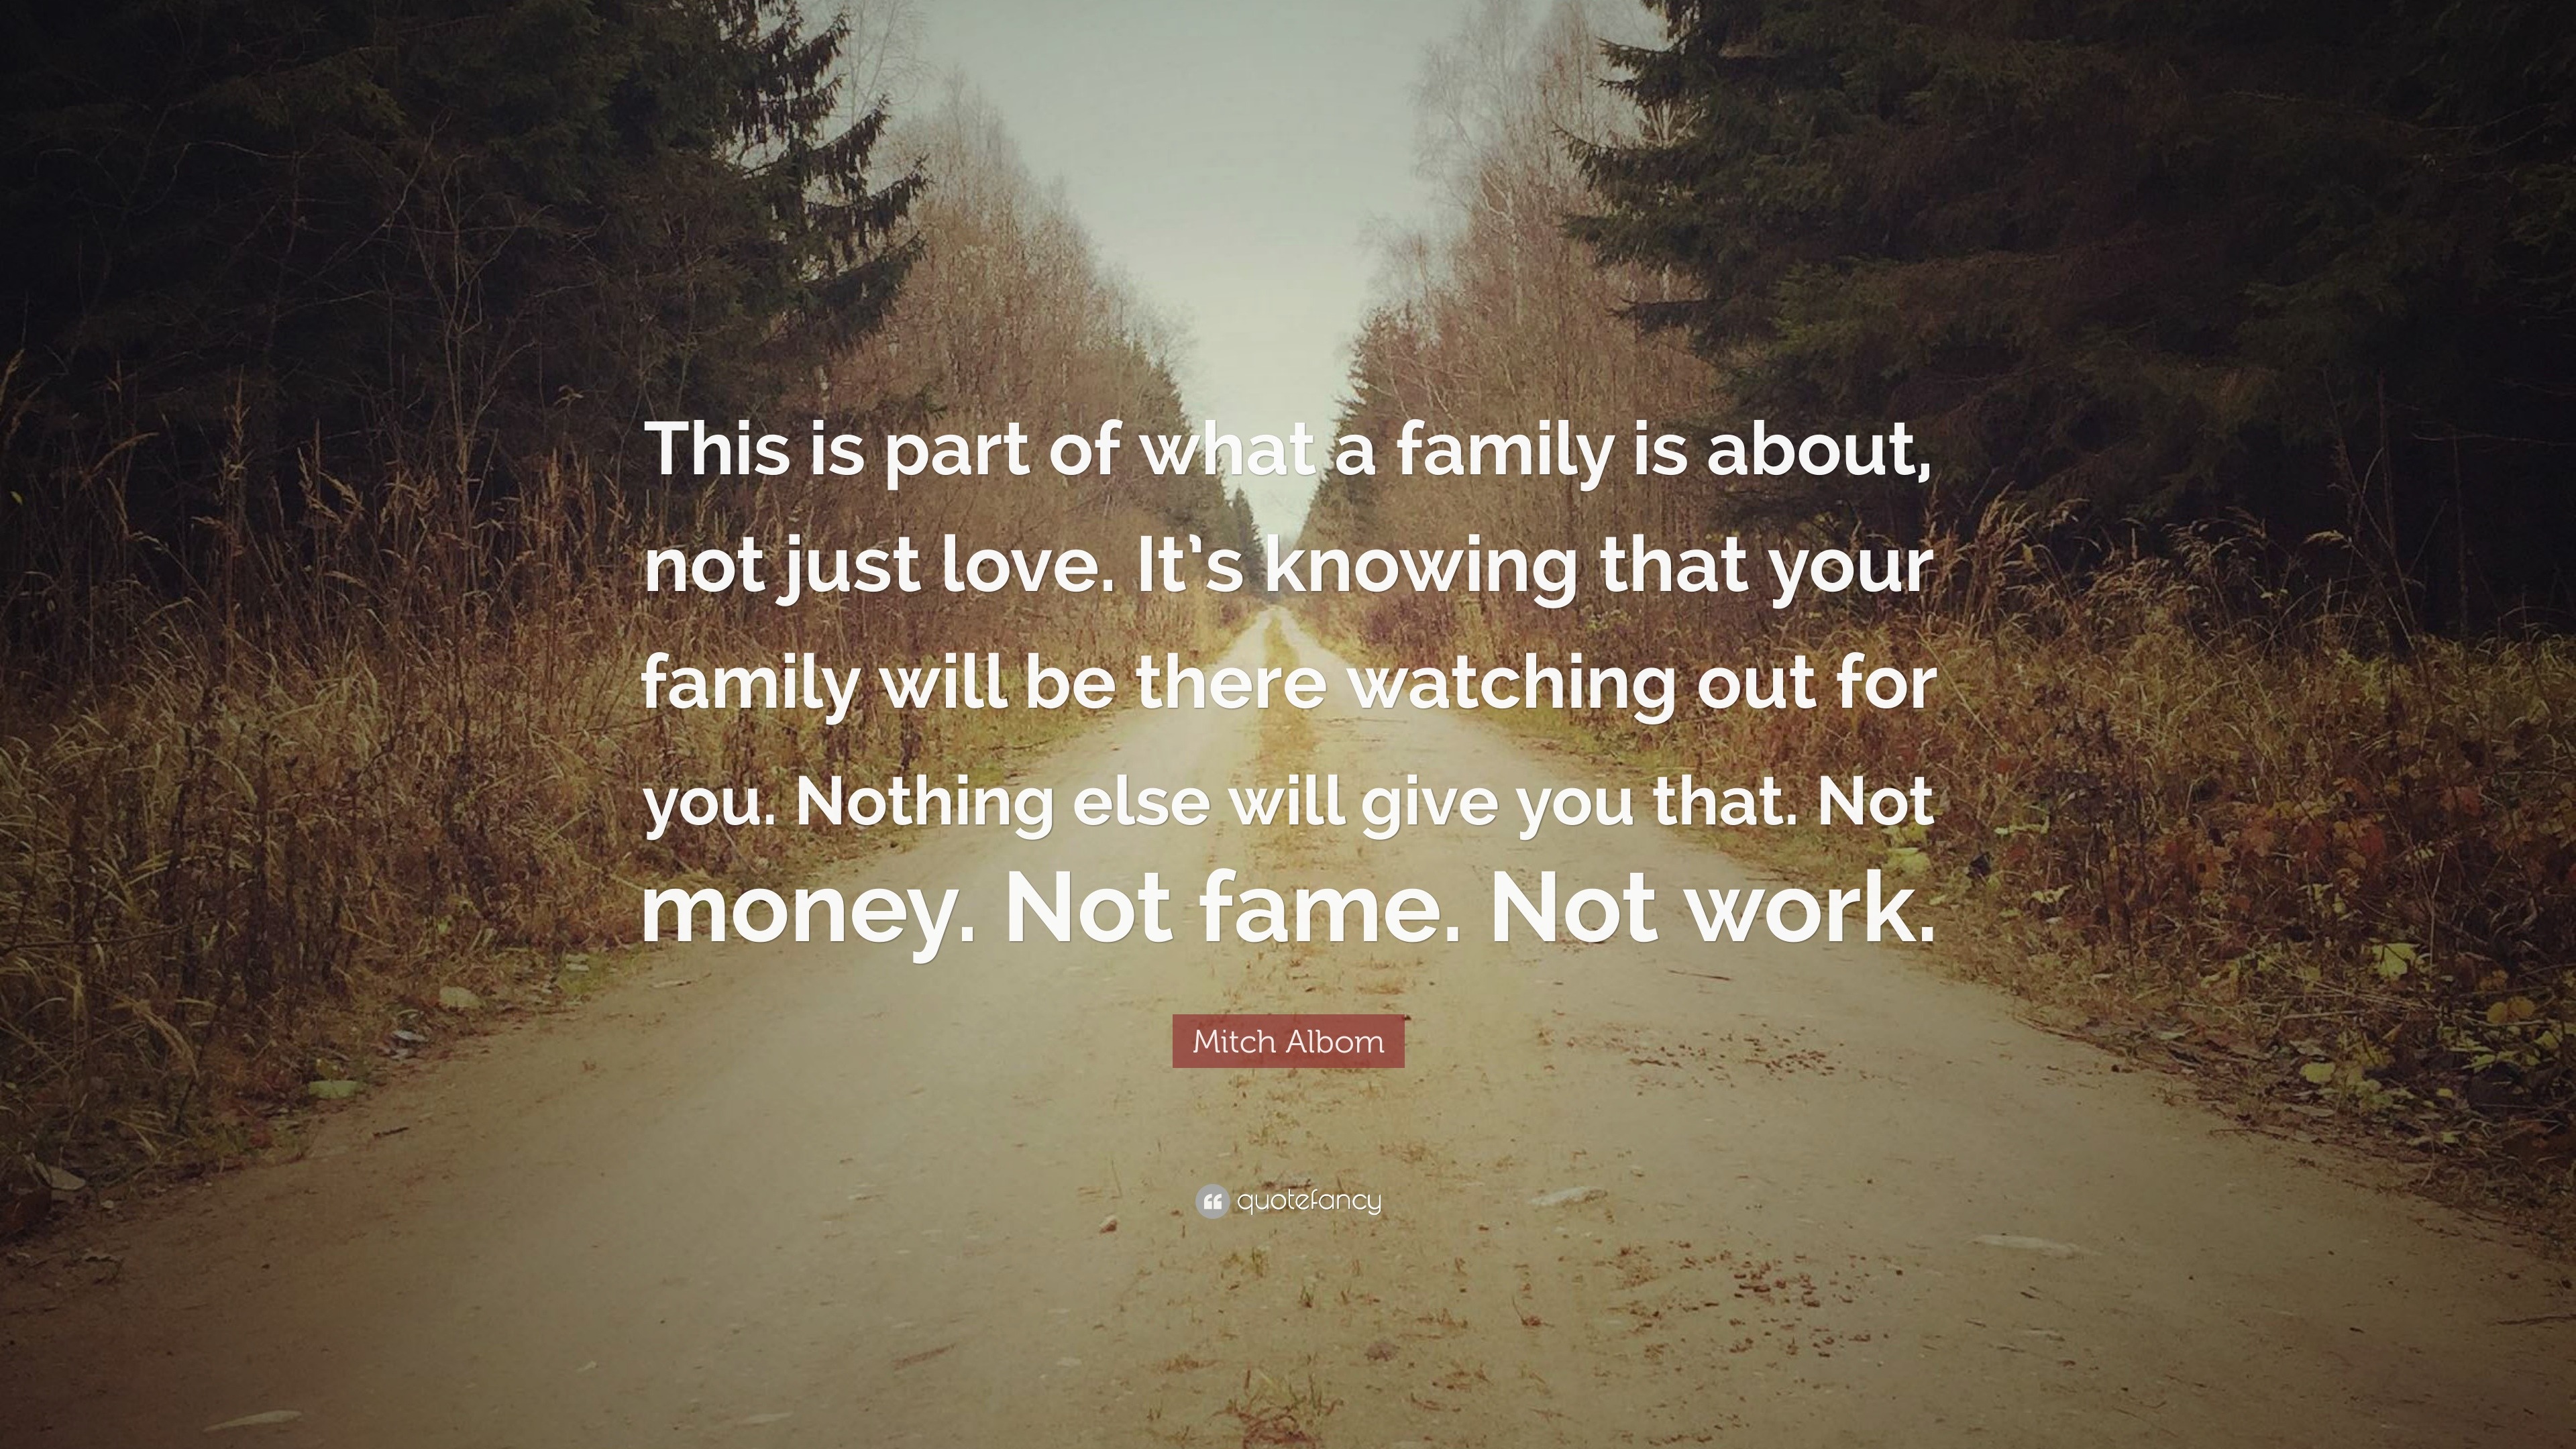 Mitch Albom Quote “This is part of what a family is about not